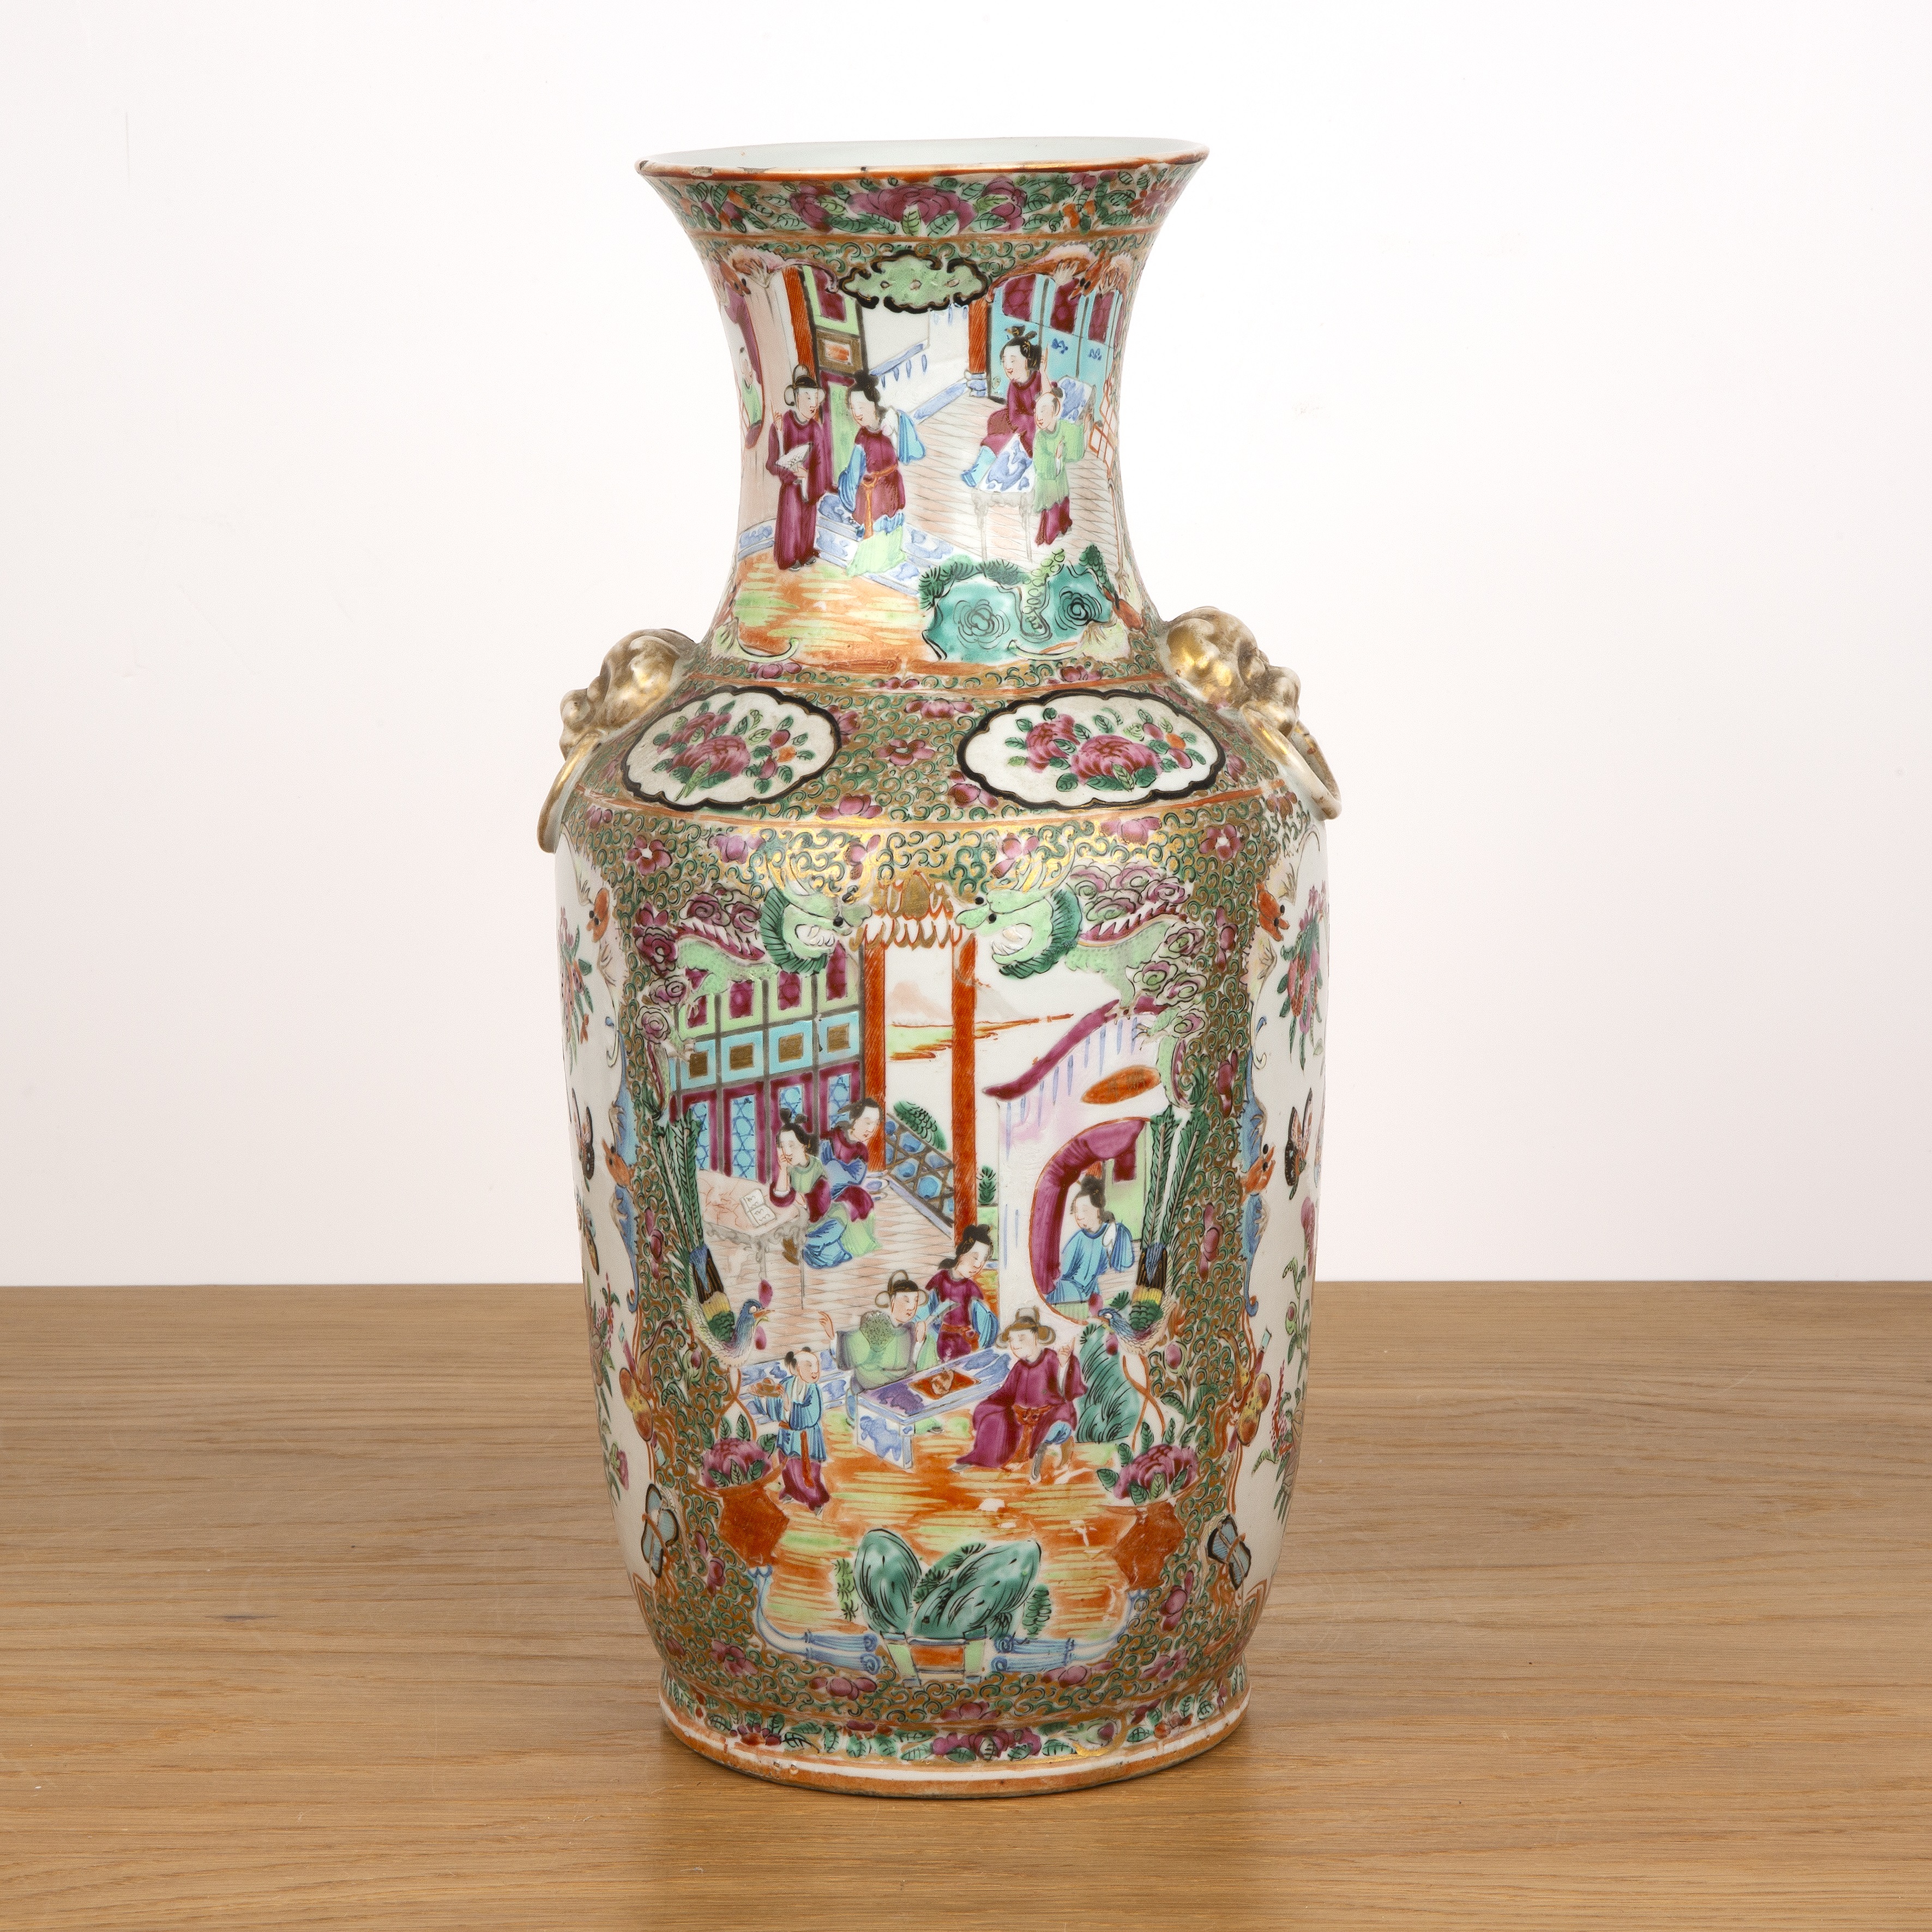 Canton porcelain vase Chinese, 19th Century painted with panels of interspersed birds, butterflies - Image 2 of 4